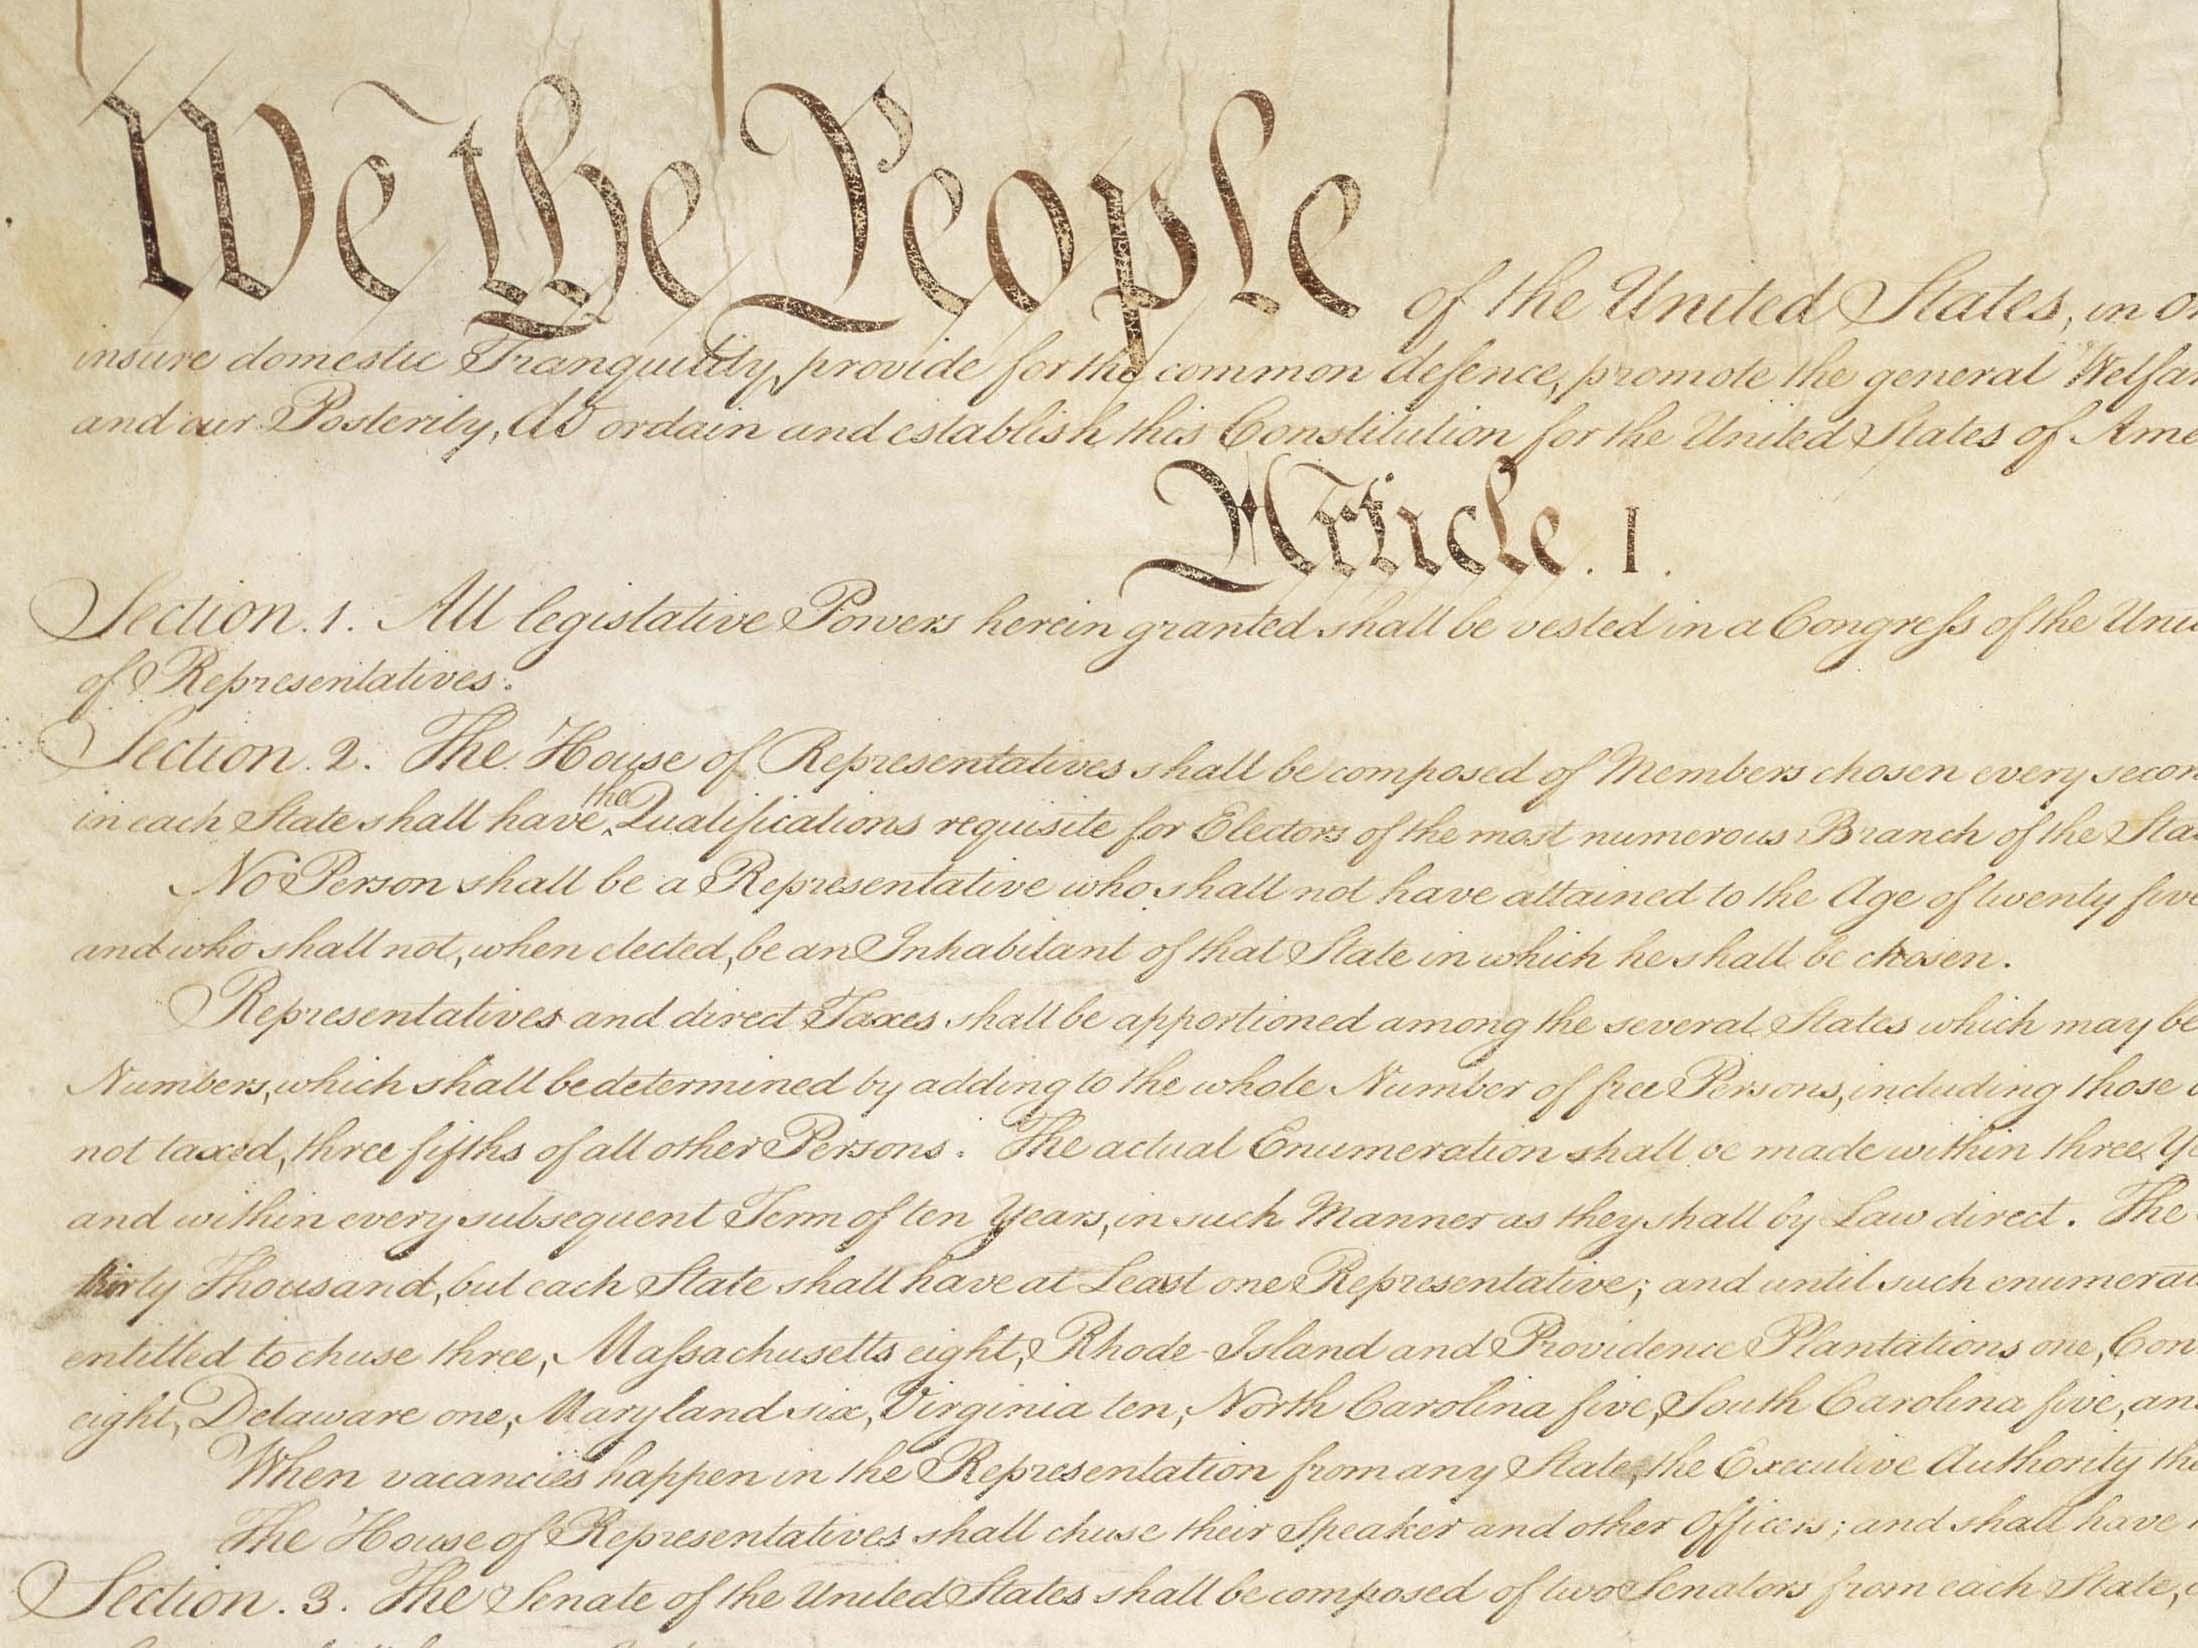 The top of the US Constitution, including large text “We the People”